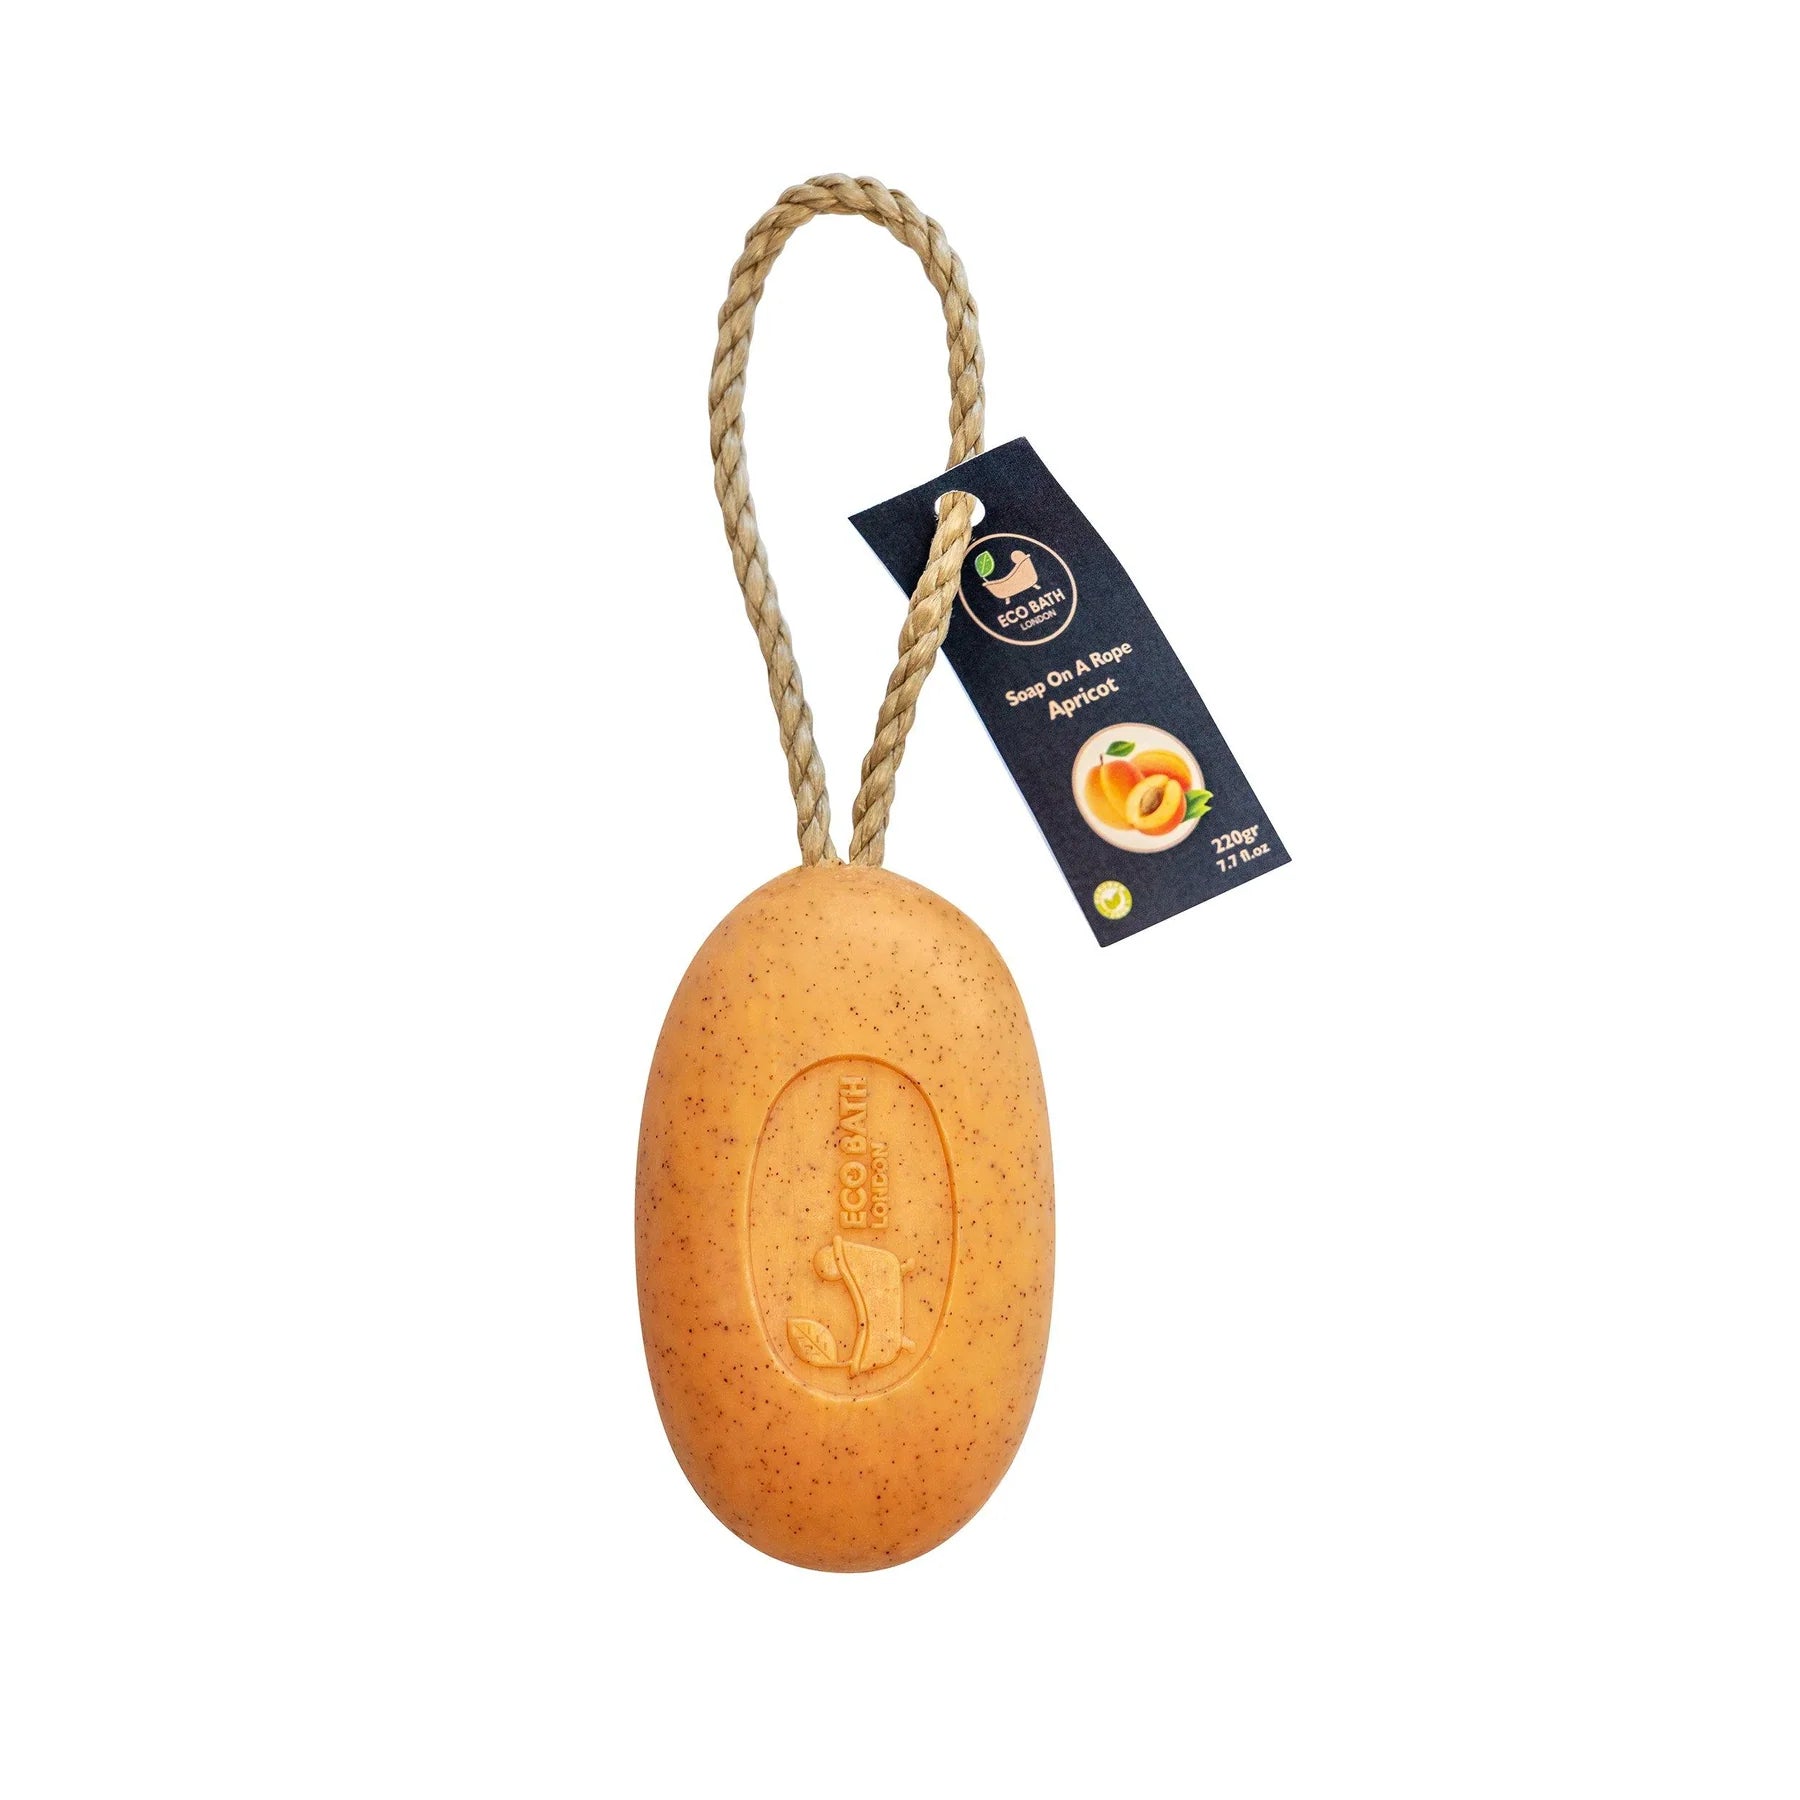 Eco Bath Apricot Soap On A Rope - 220g